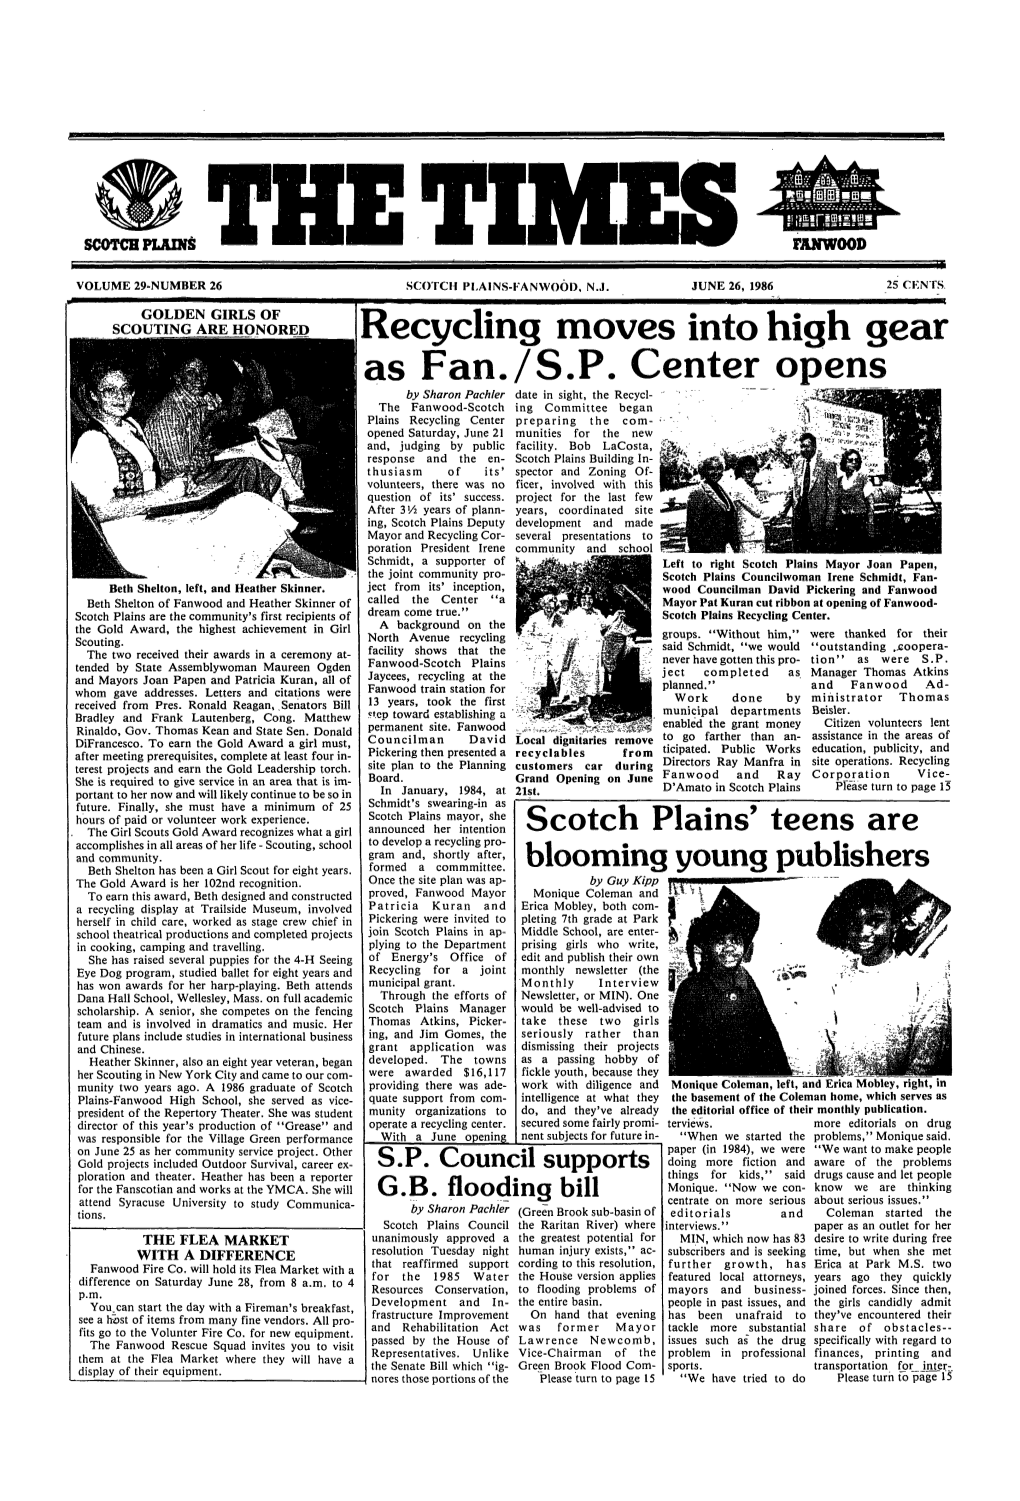 Scotch Plains the Times Fanwood Volume 29-Number 26 Scotch Plains-Fanwood, N.J, June 26, 1986 25 Cknts